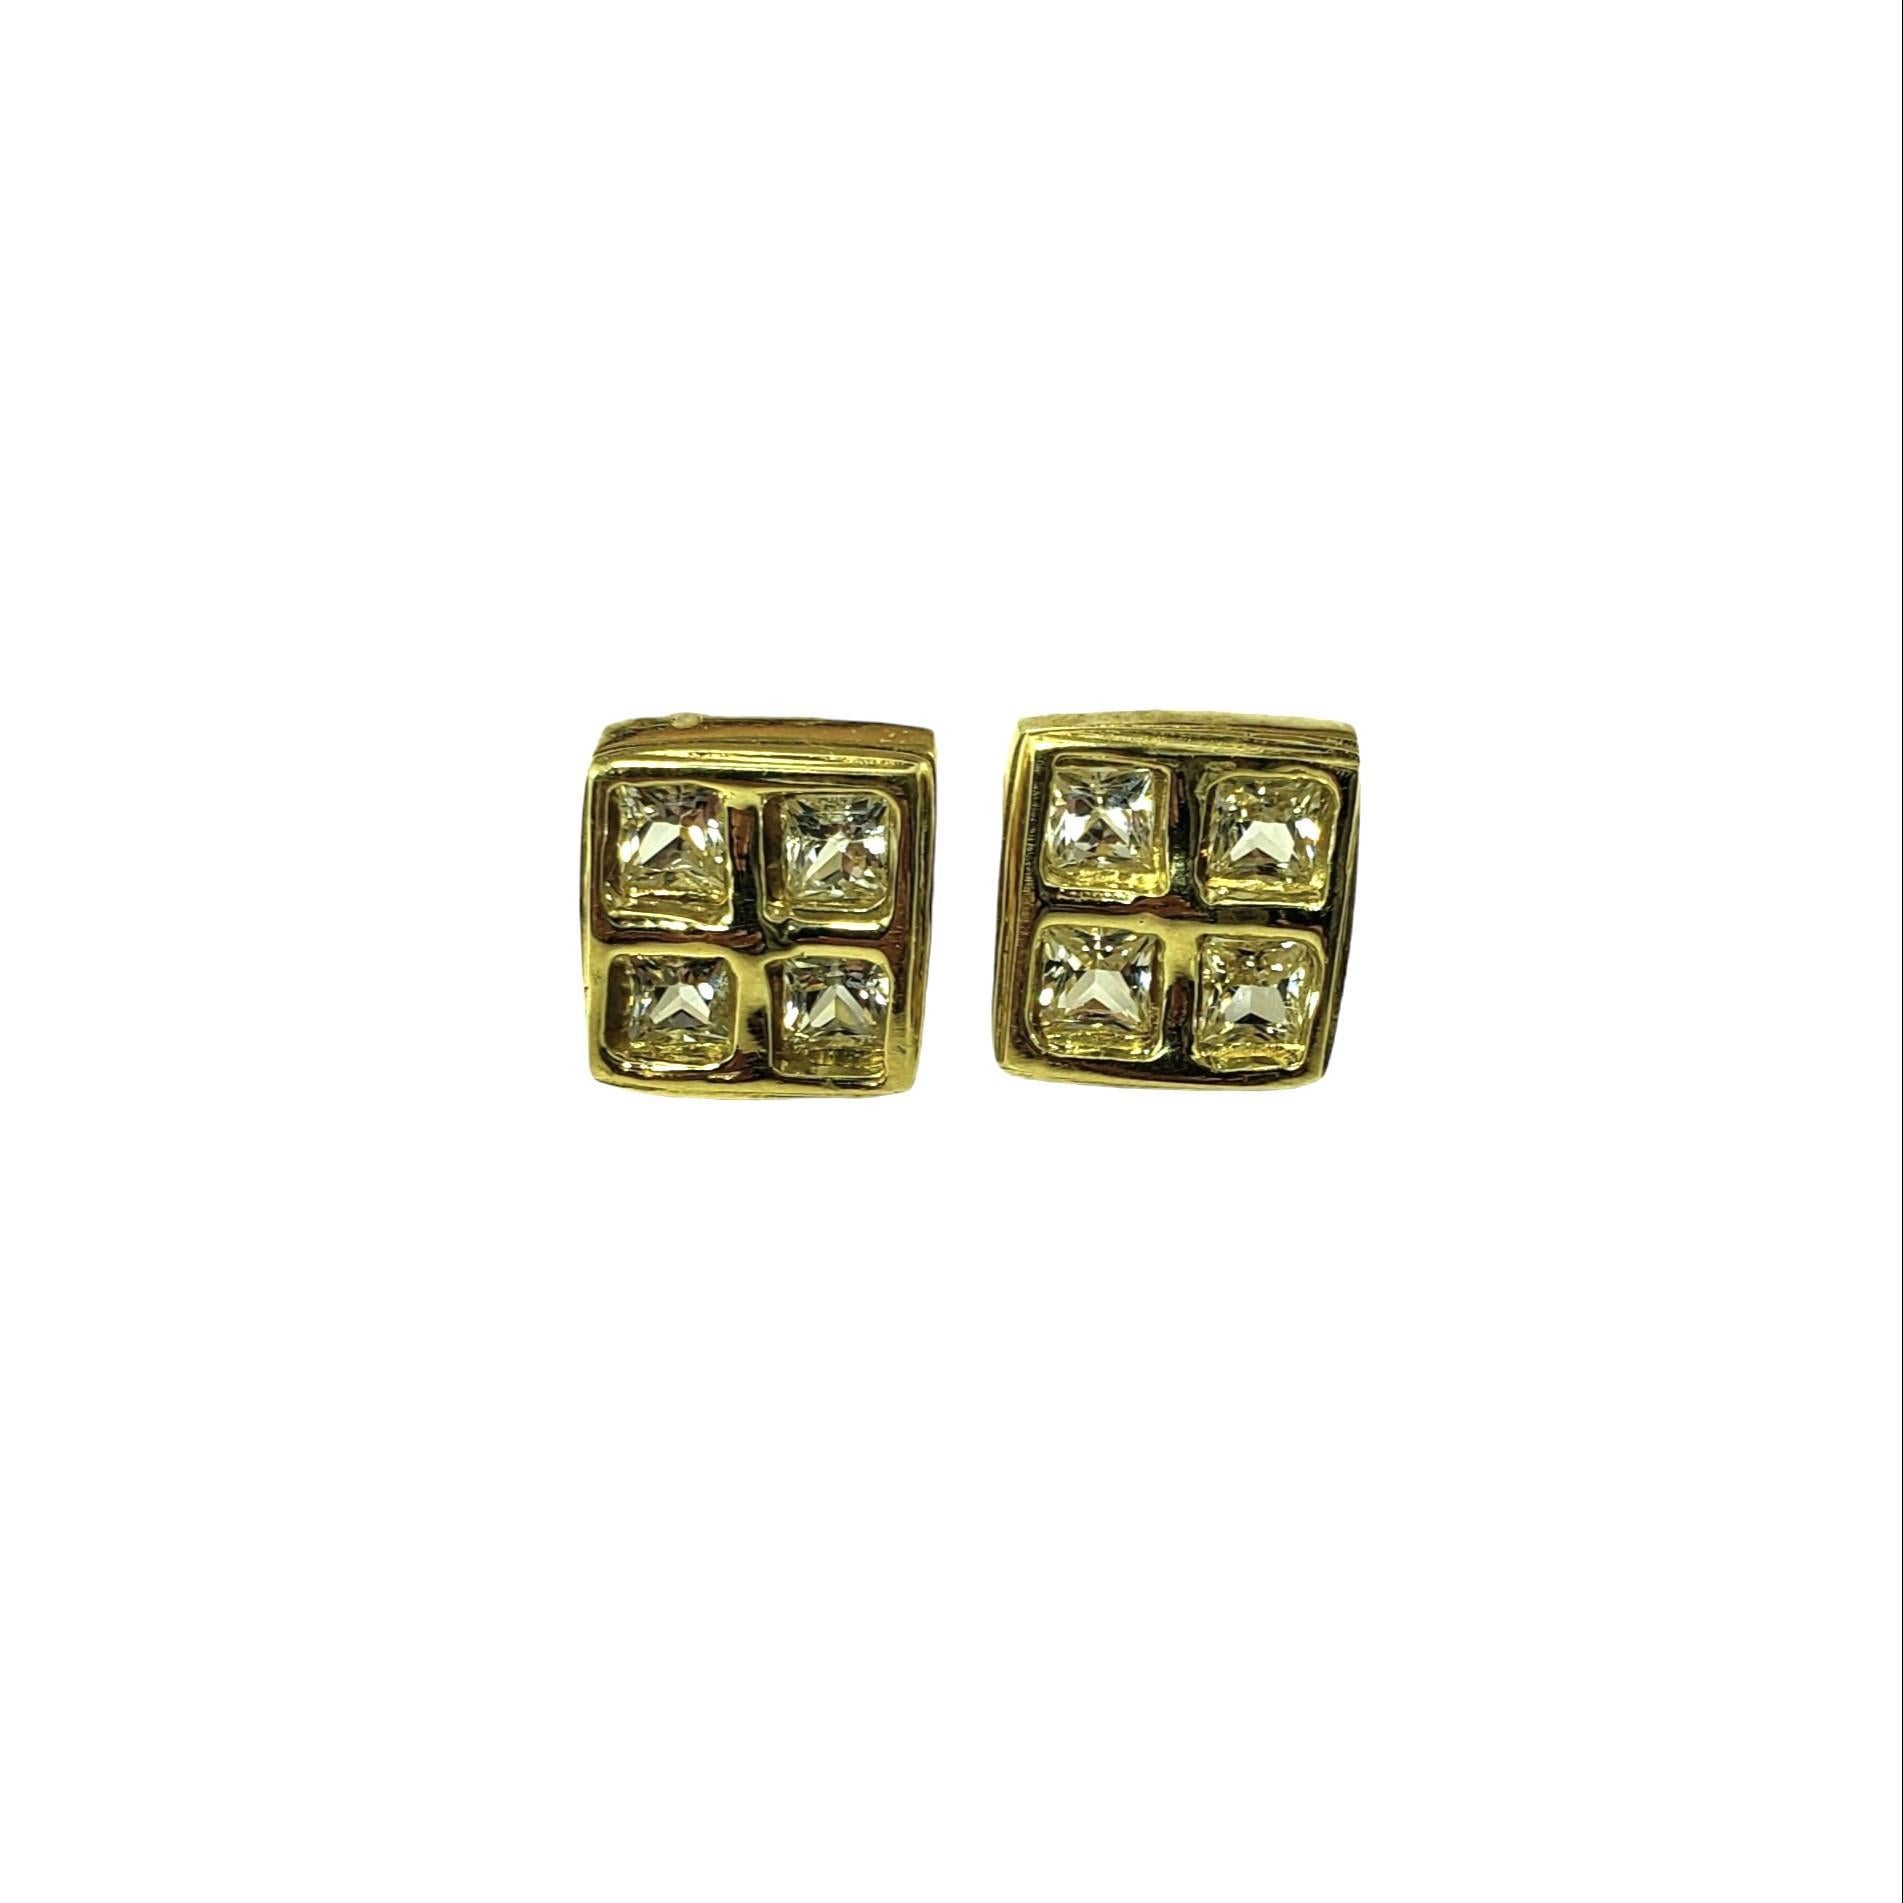 Robin Rotenier 18K Yellow Gold and White Sapphire Earrings -

These elegant earrings each feature four faceted square white sapphires set in classic 18K yellow gold.  Push back closures.

Approximate total sapphire weight:  1.75 ct.

Size:  10.5 mm